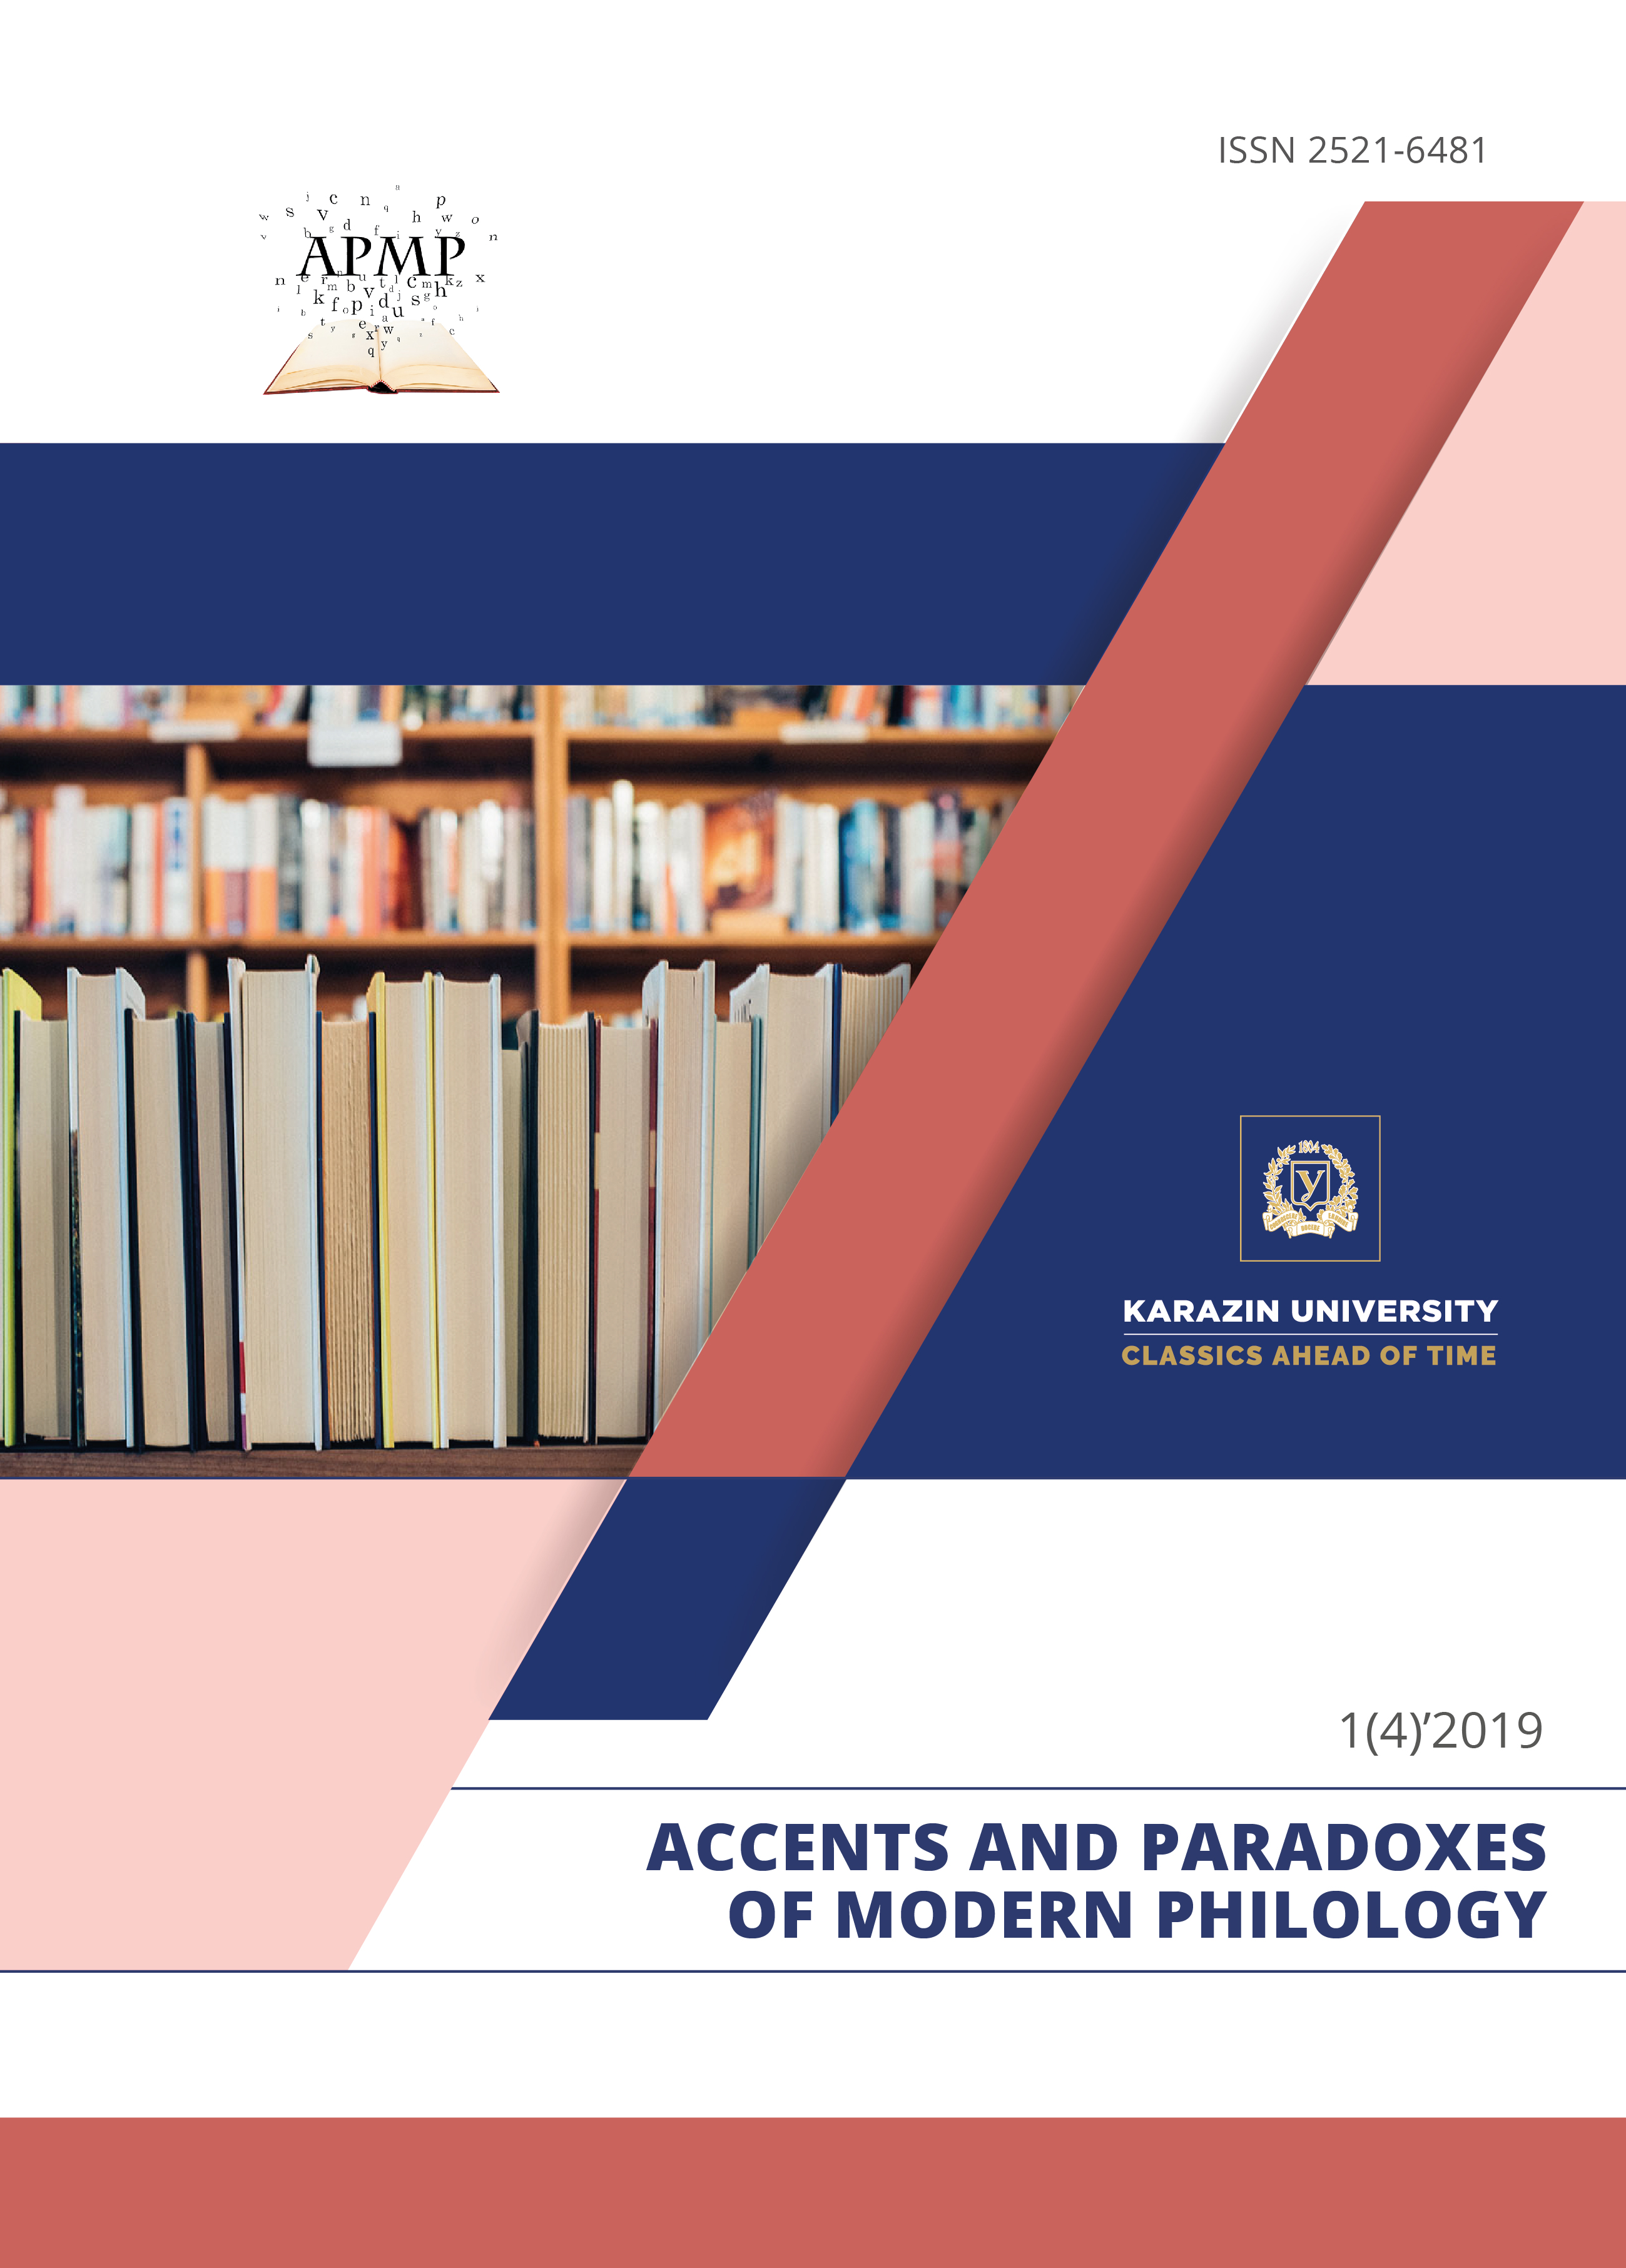 International and interdisciplinary journal "Accents and Paradoxes of Modern Philology"